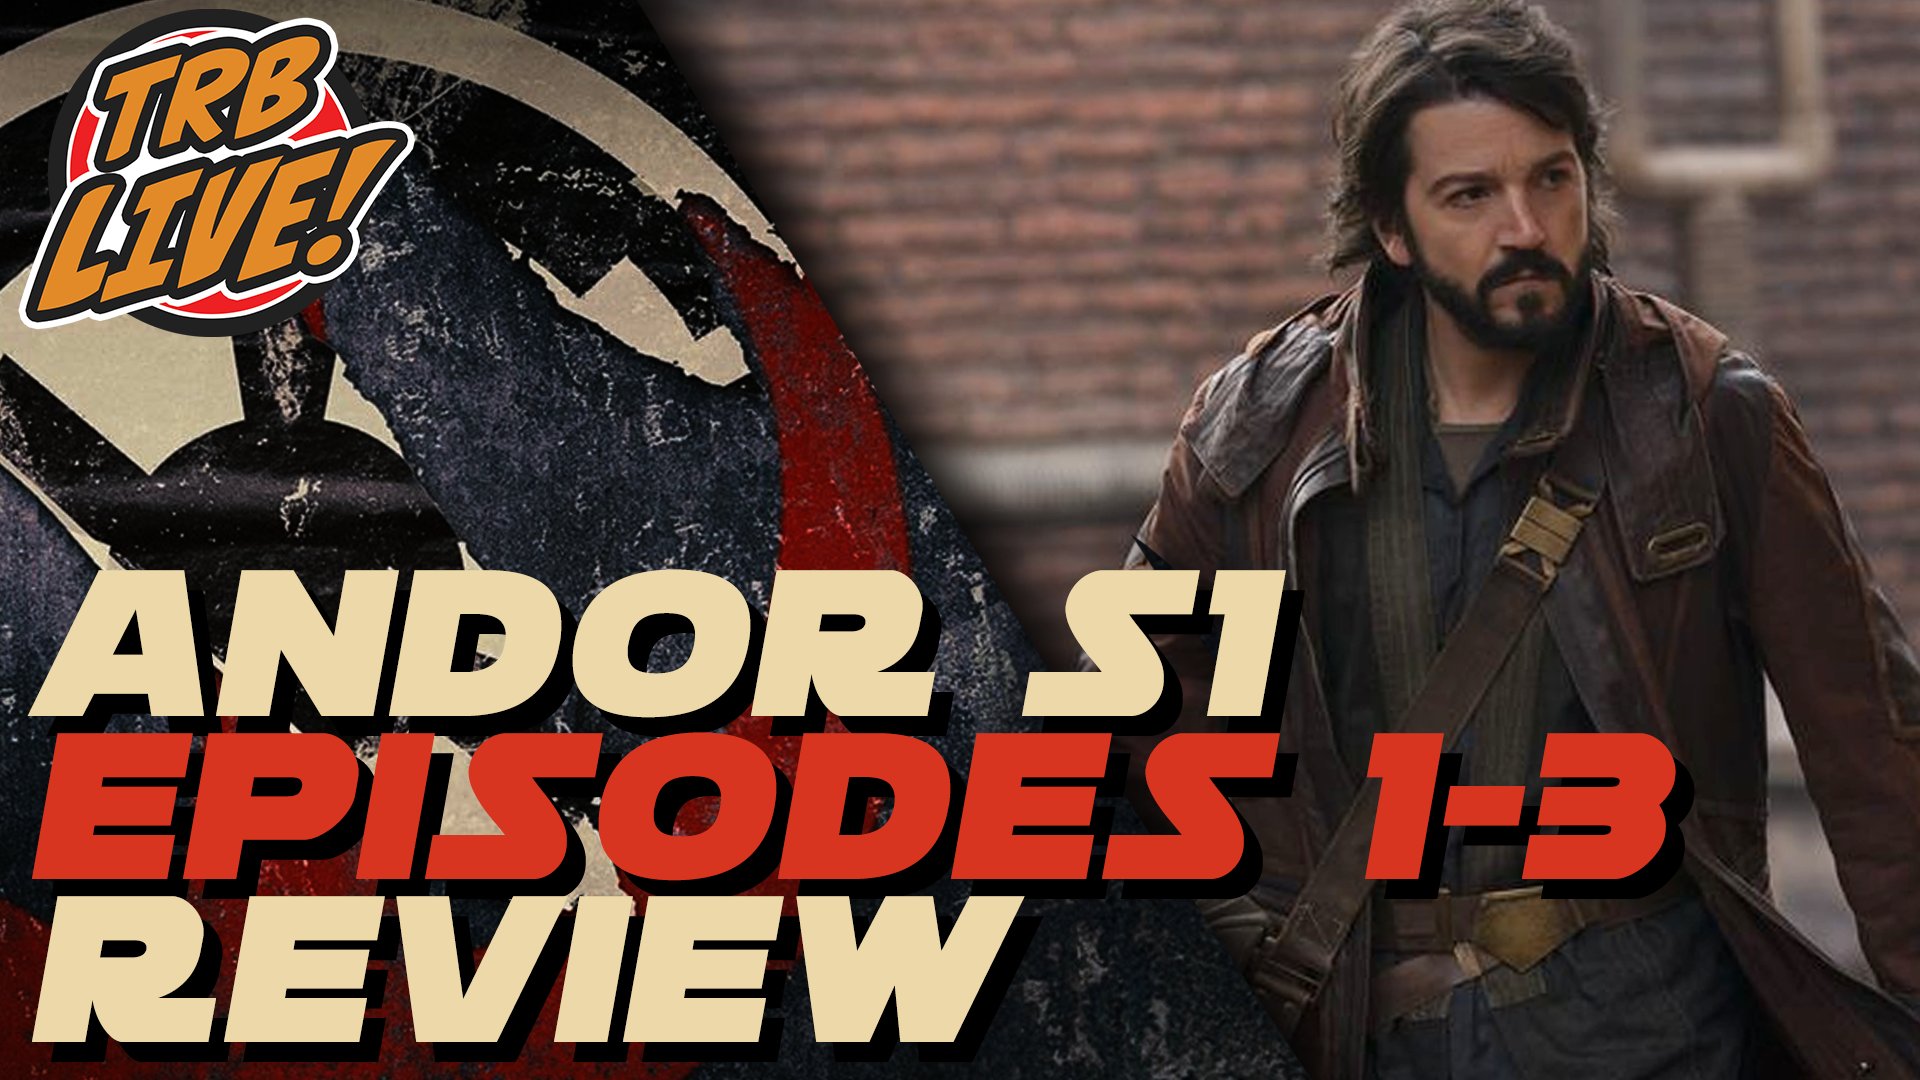 Star Wars: Andor Episode 1-3 Review